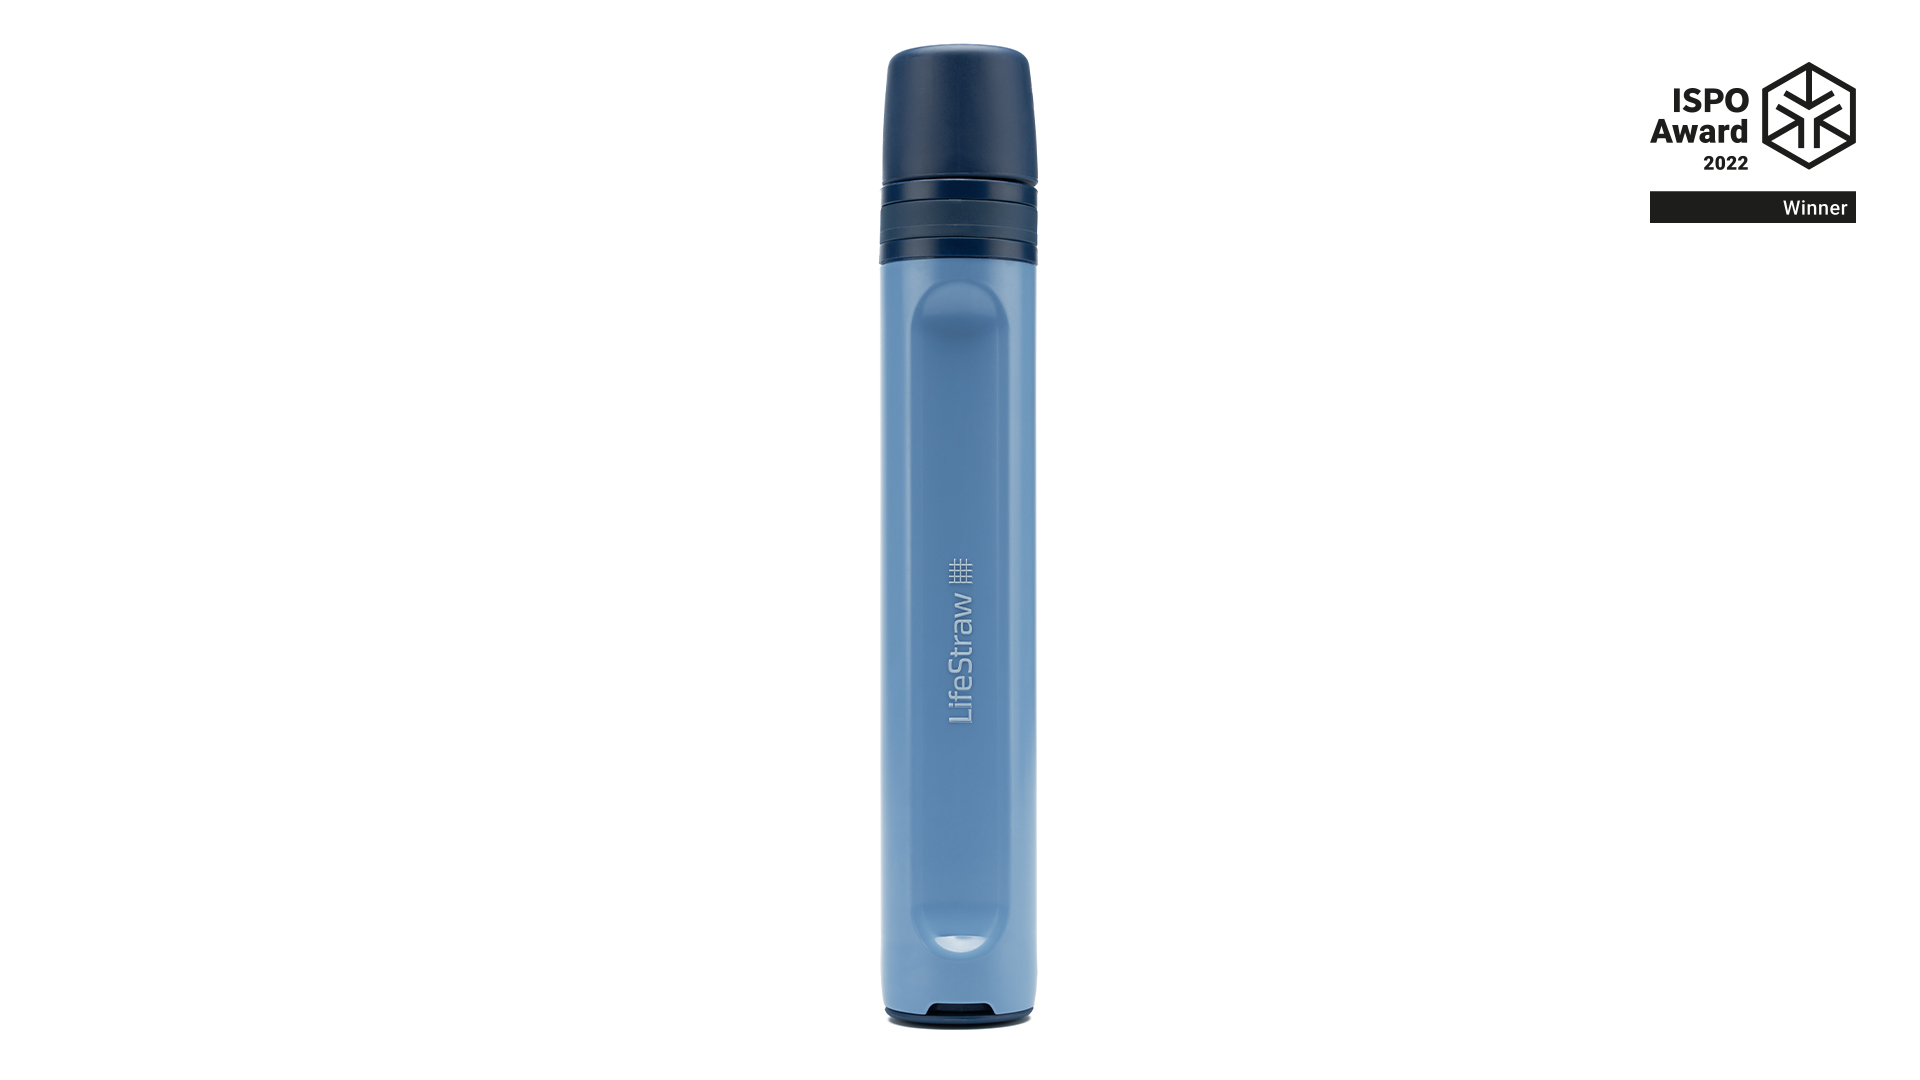 LifeStraw Saves Those Without Access to Clean Drinking Water - The